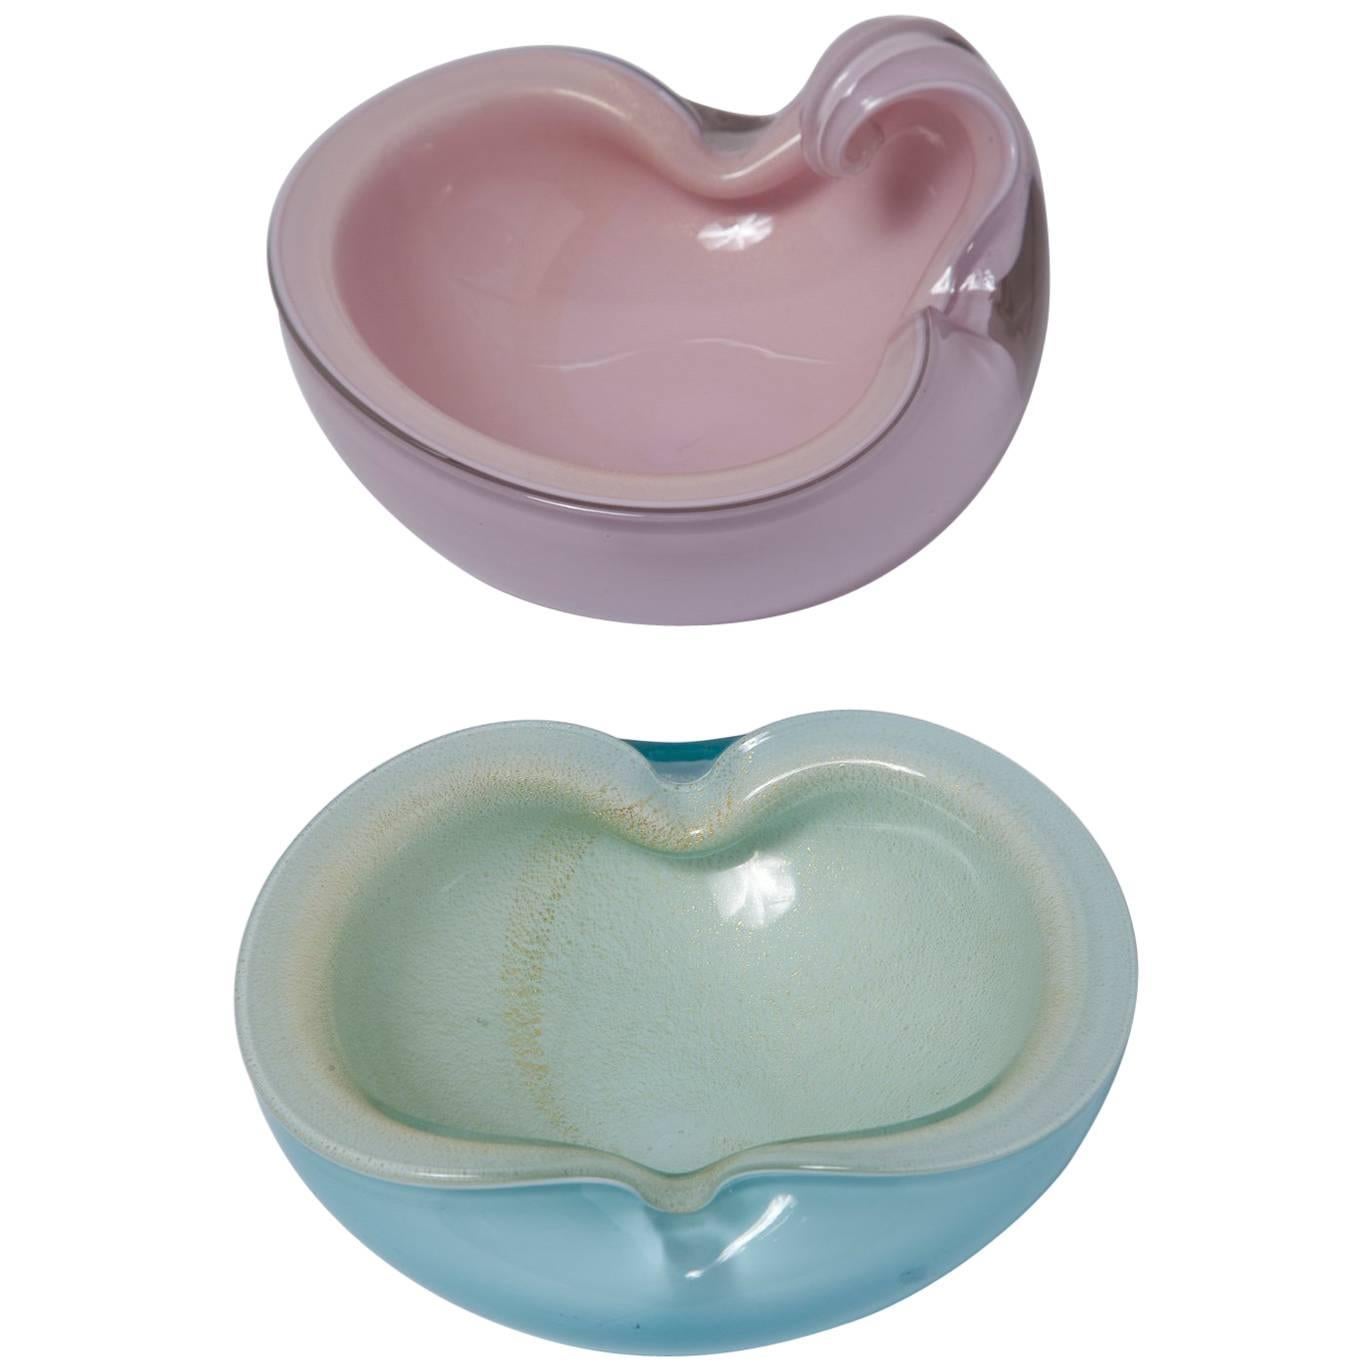 1950s Murano Art Glass Bowls in Gold Dusted Pink and Blue by Alfredo Barbini